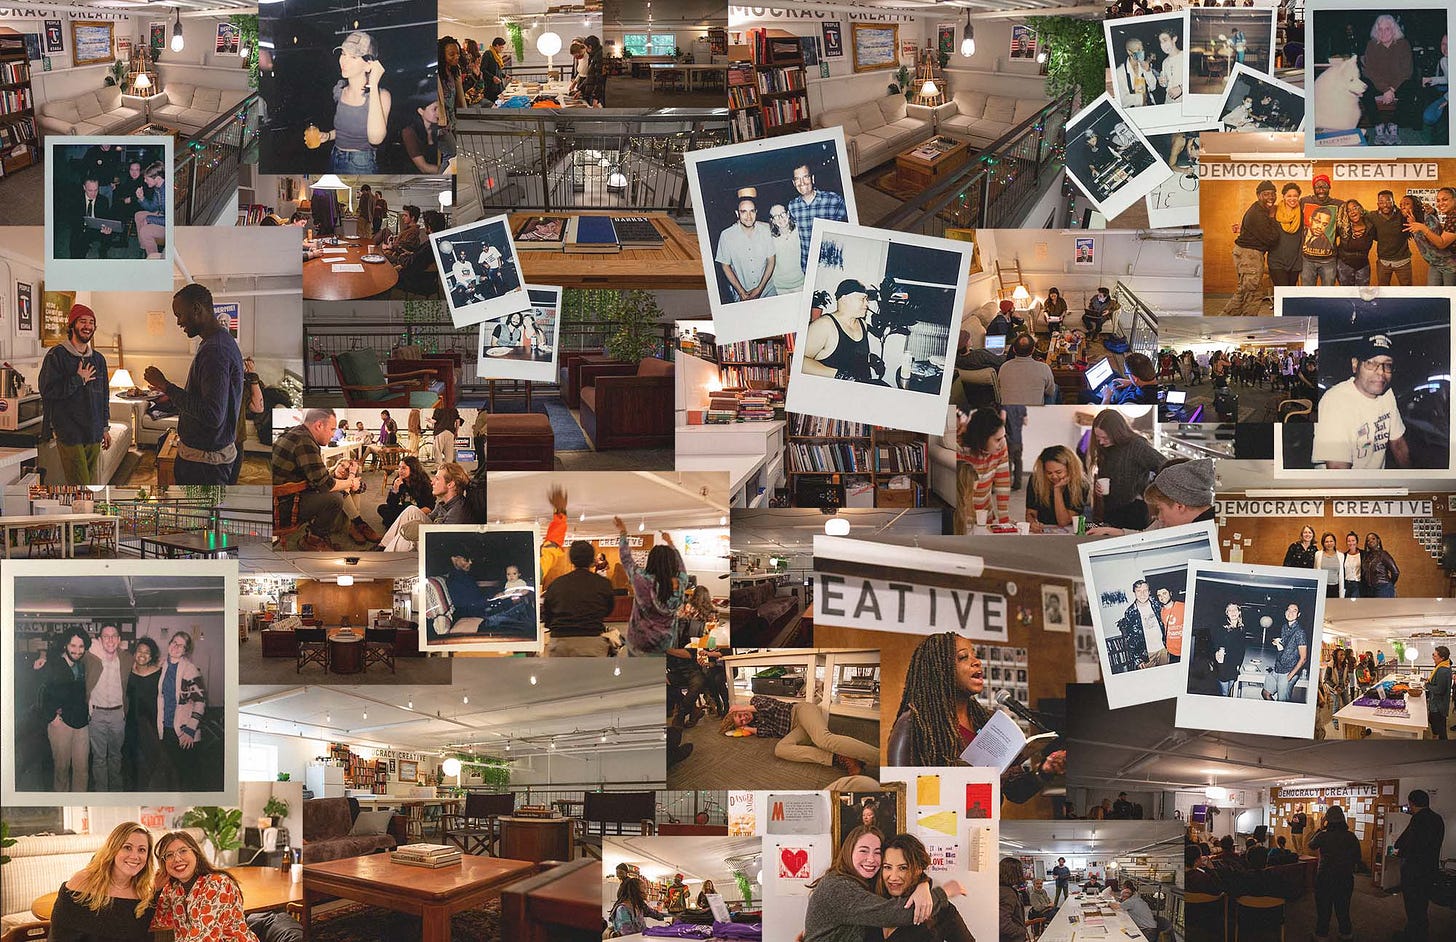 A collage of photographs from events hosted at Democracy Creative's space, showing many happy moments.